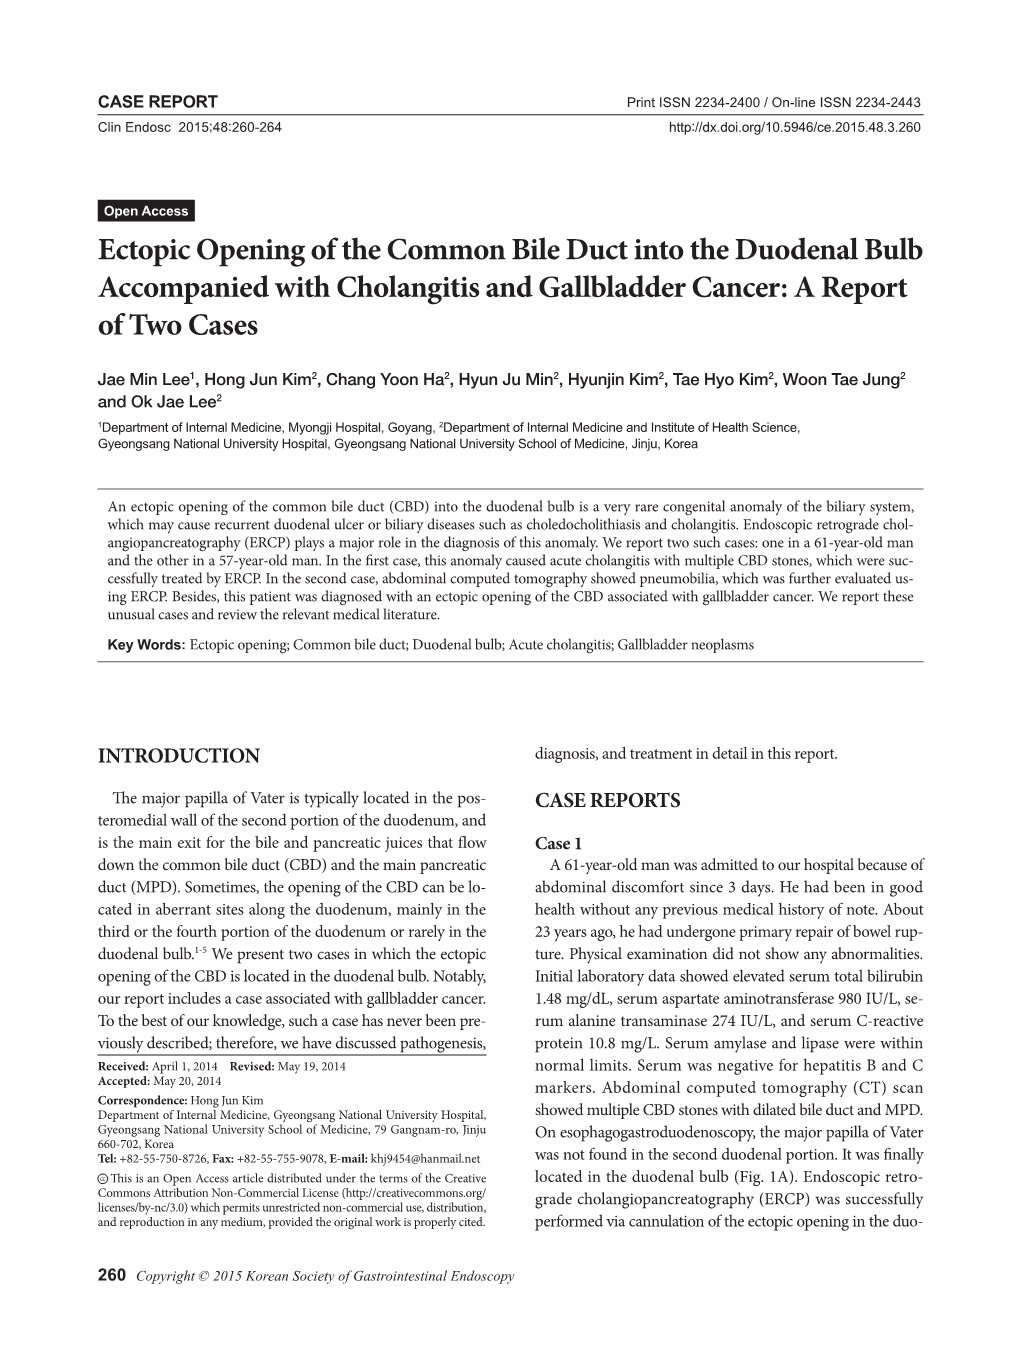 Ectopic Opening of the Common Bile Duct Into the Duodenal Bulb Accompanied with Cholangitis and Gallbladder Cancer: a Report of Two Cases